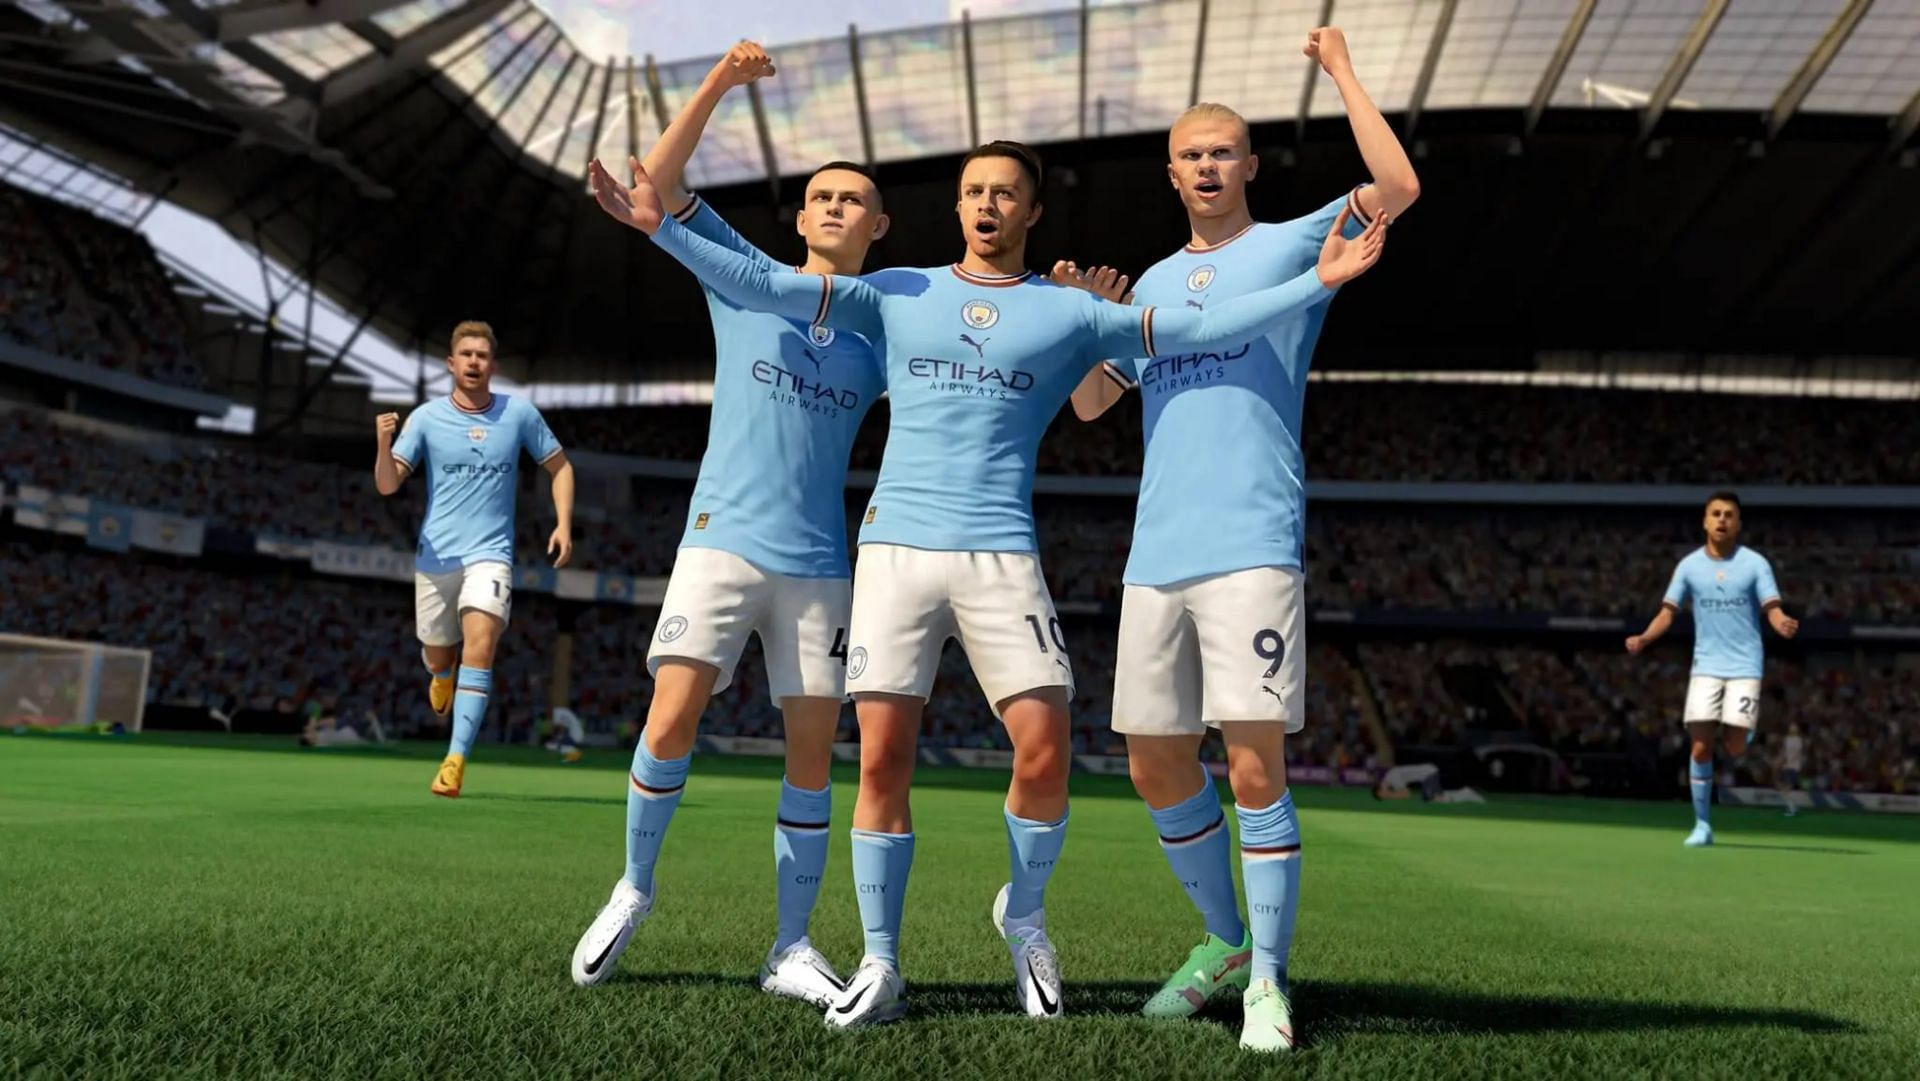 The career mode will allow players to control teams like Manchester City (Image via EA Sports)